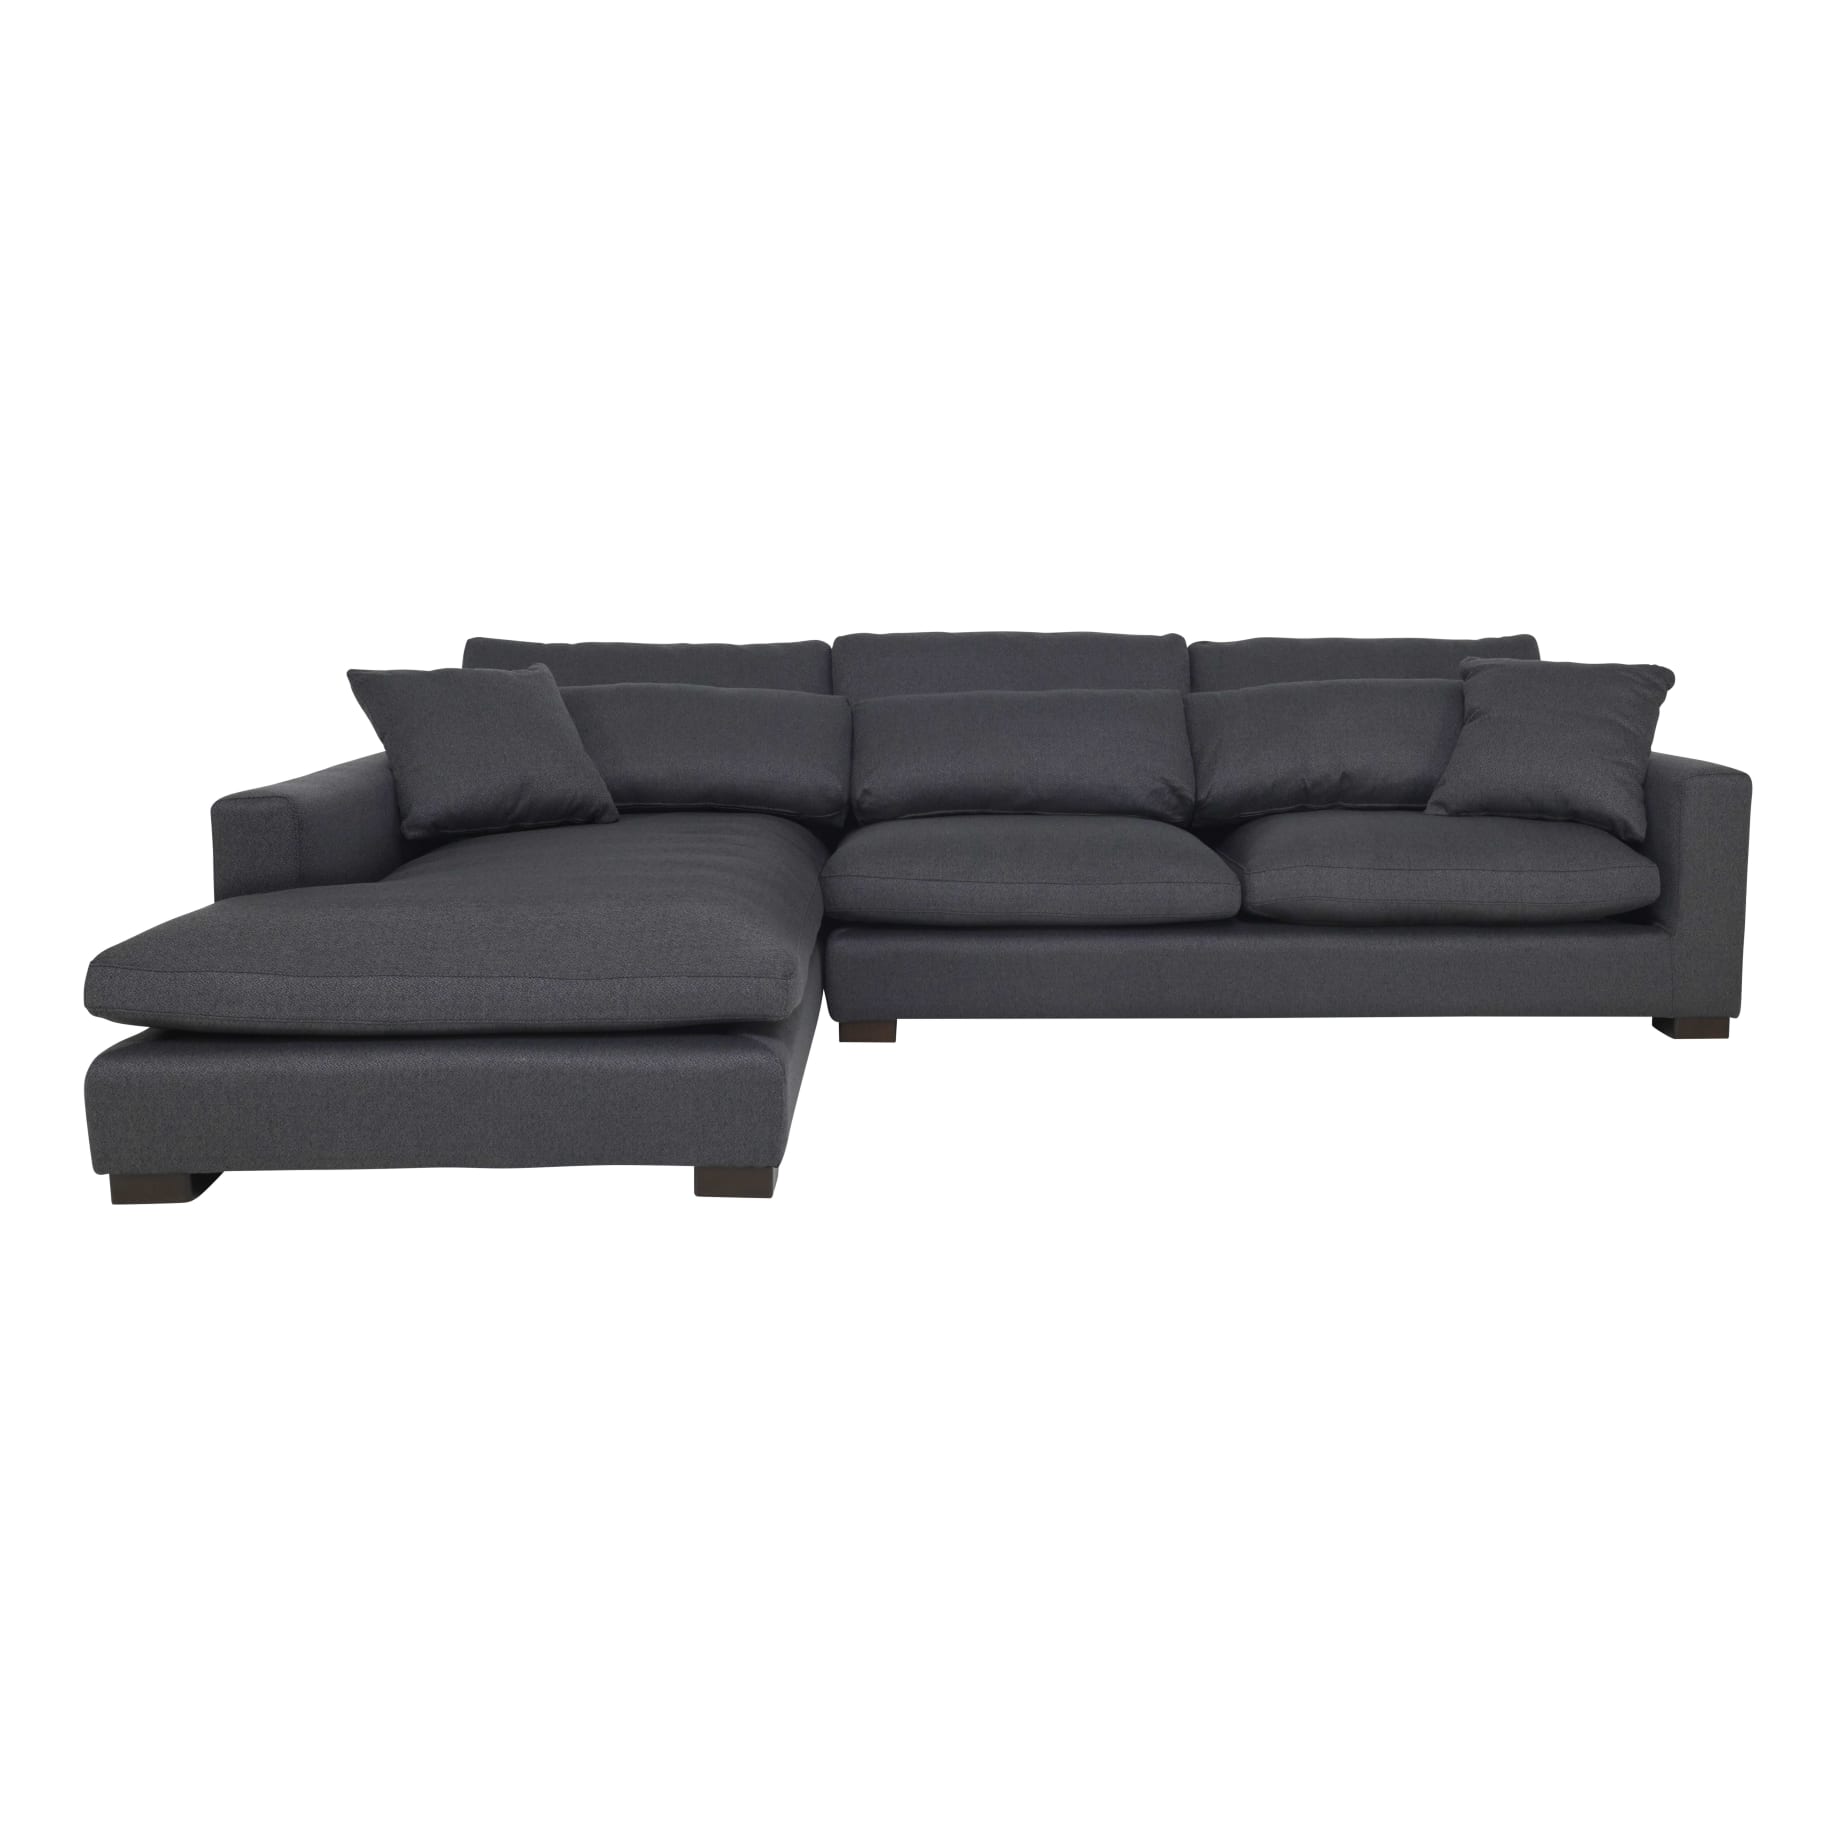 Cleo 3 Seater + Chaise LHF in Gusto Charcoal